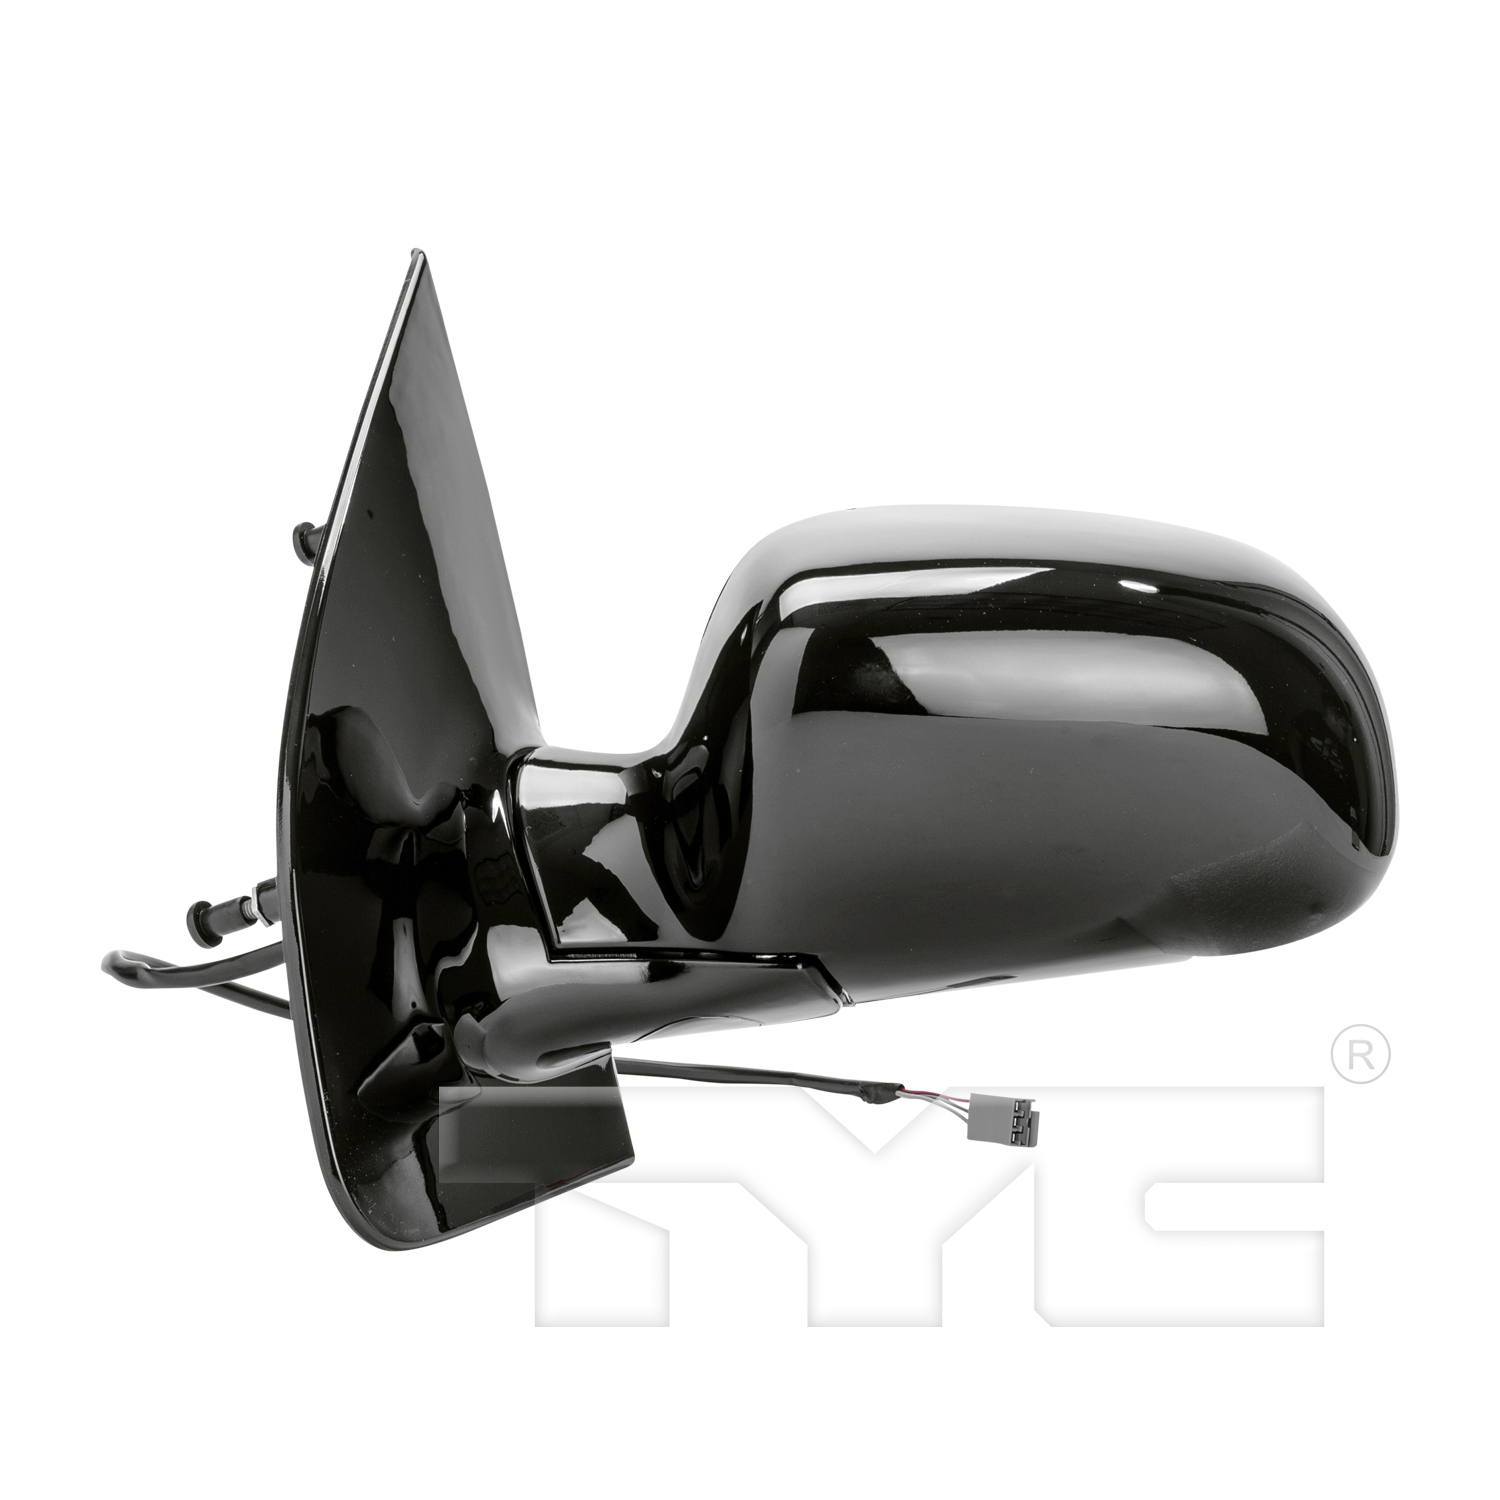 Aftermarket MIRRORS for CHEVROLET - EXPRESS 1500, EXPRESS 1500,96-02,LT Mirror outside rear view